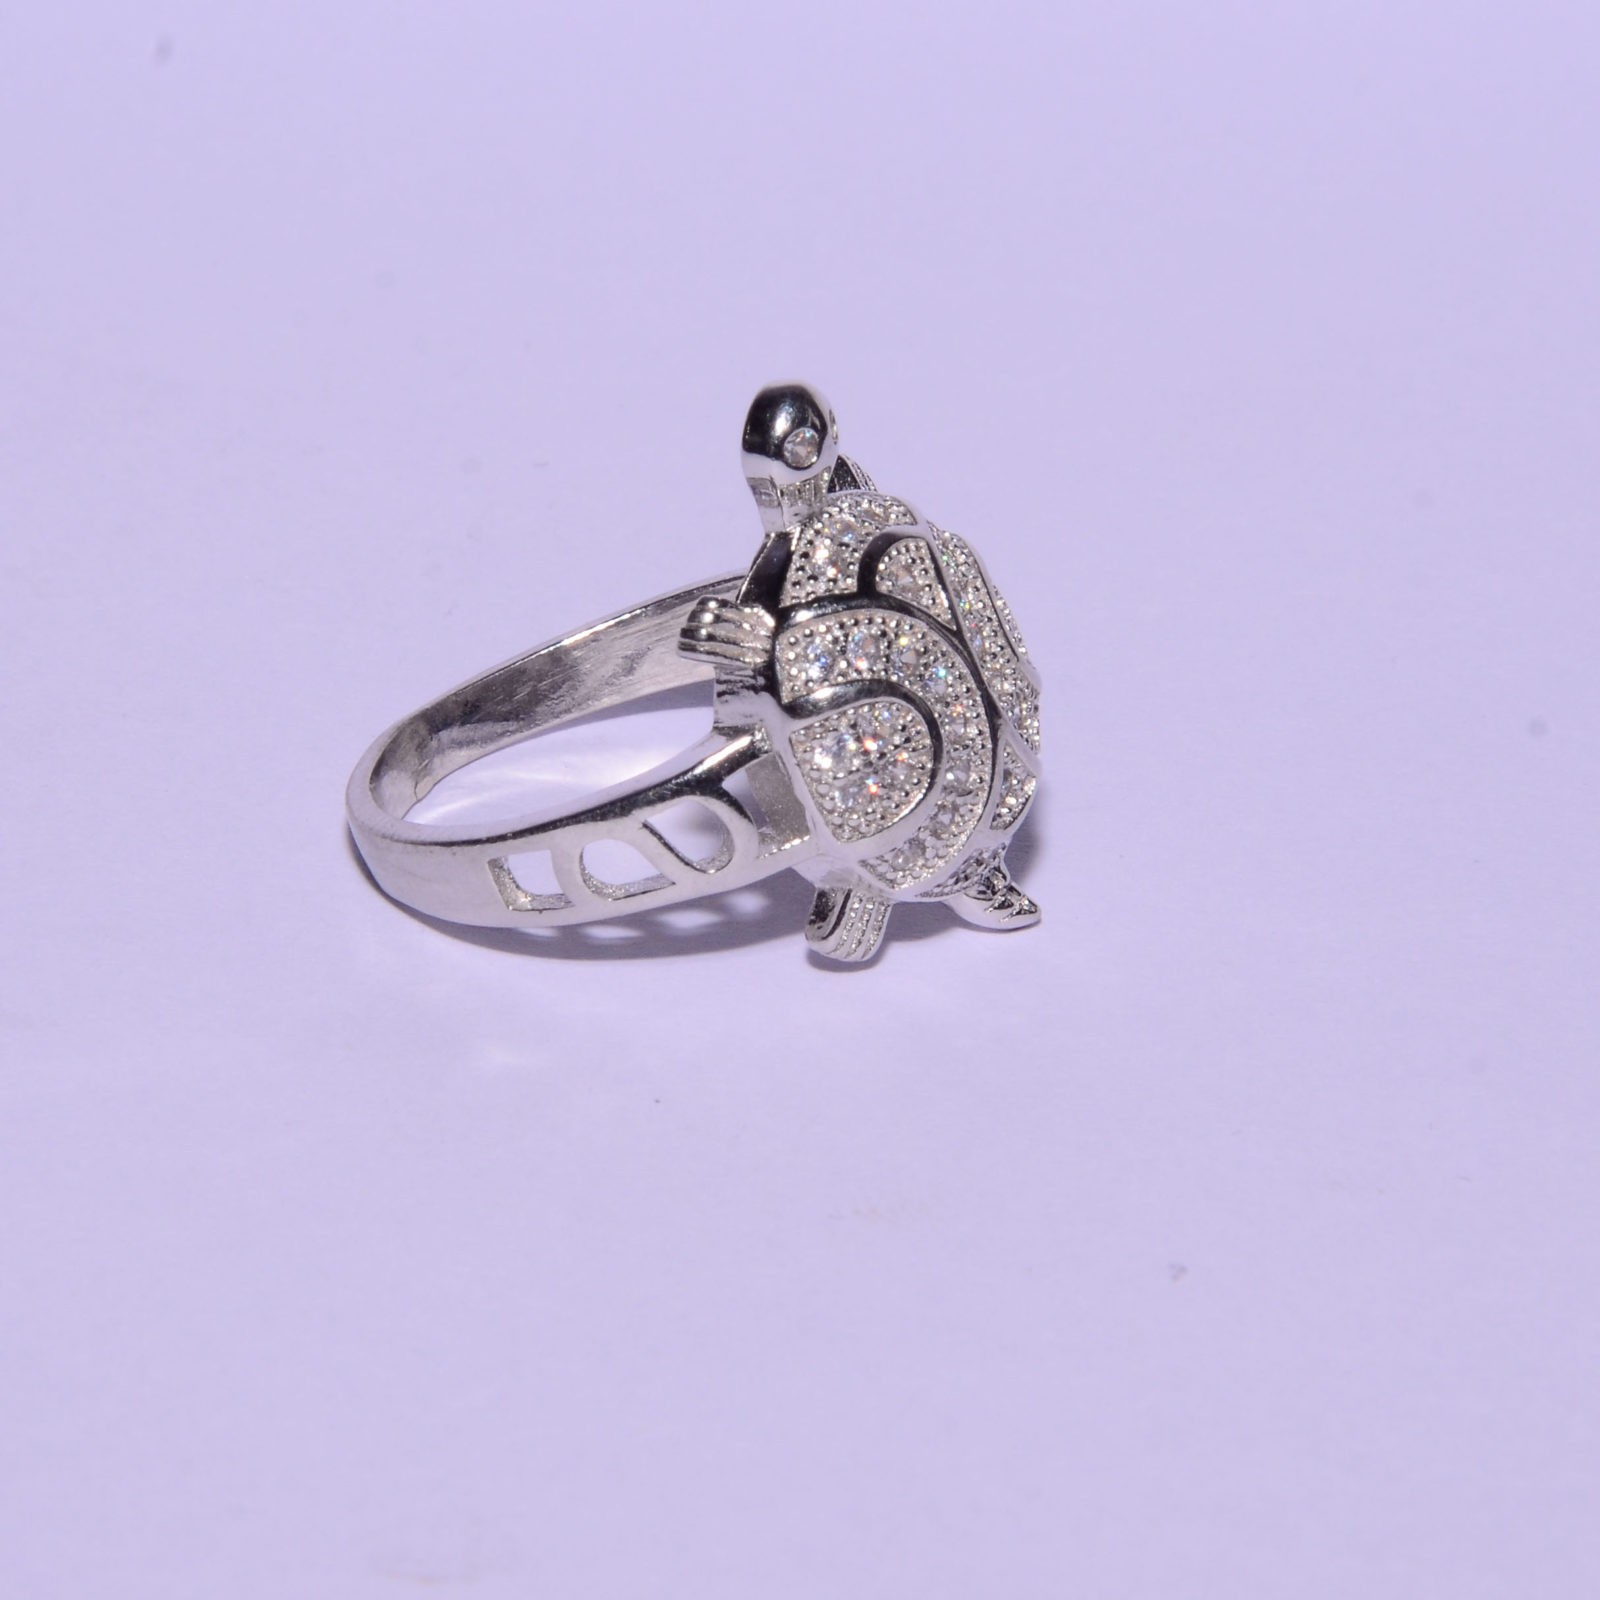 Diamond Studded Tortoise Ring Jewelry in Pure Silver - Etsy UK